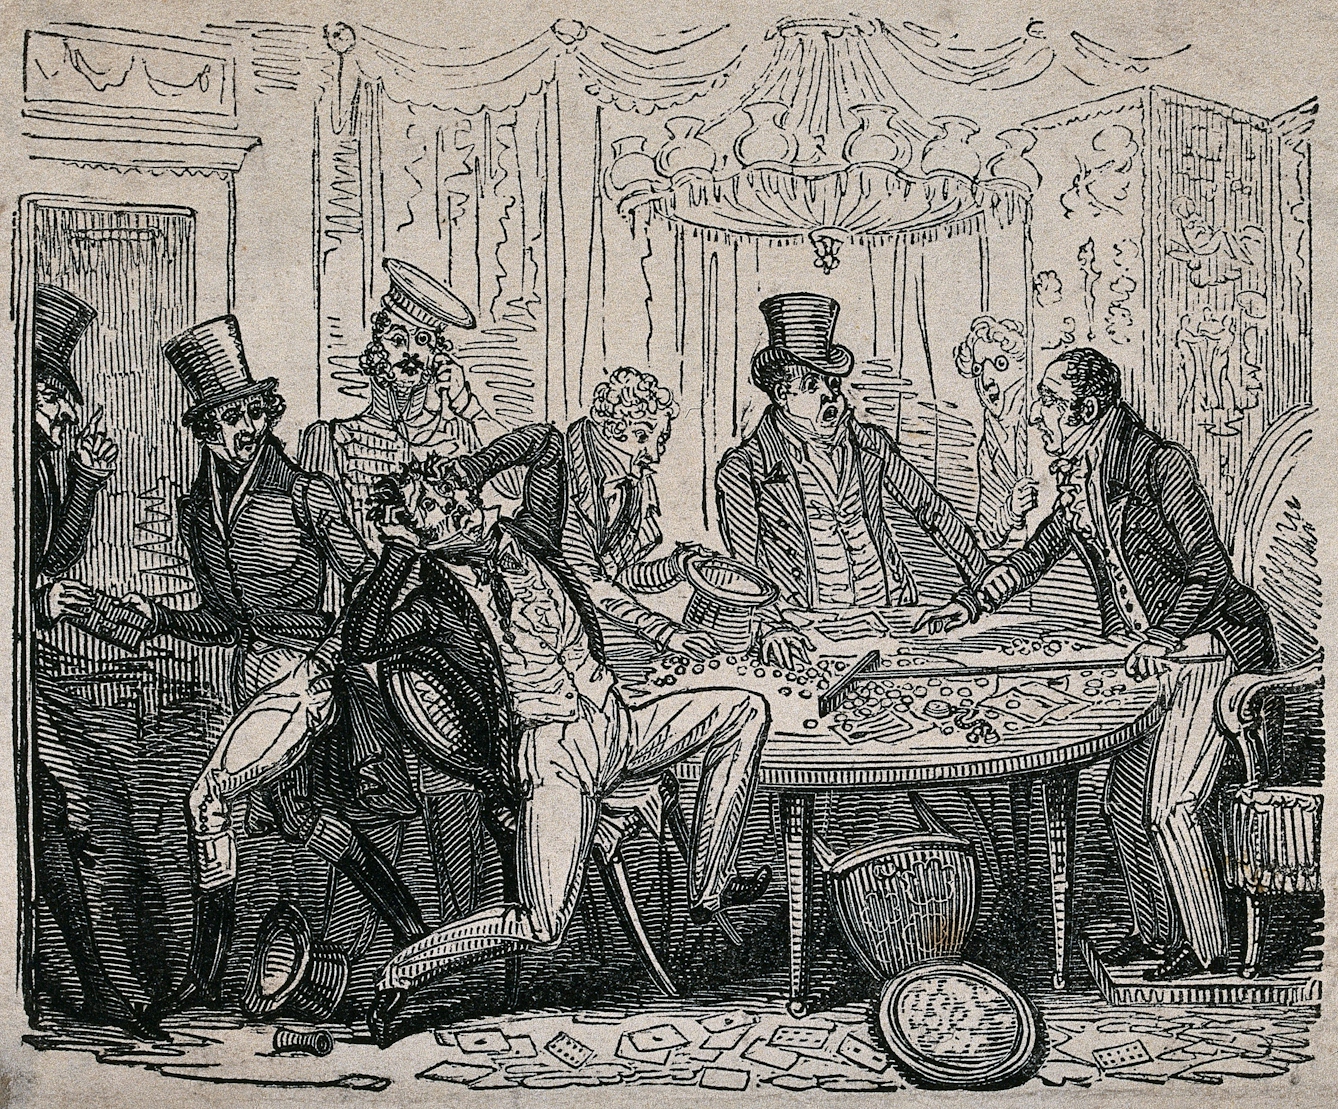 An engraving showing a man holding his head in despair as the croupier claims all his chips in the gambling game.